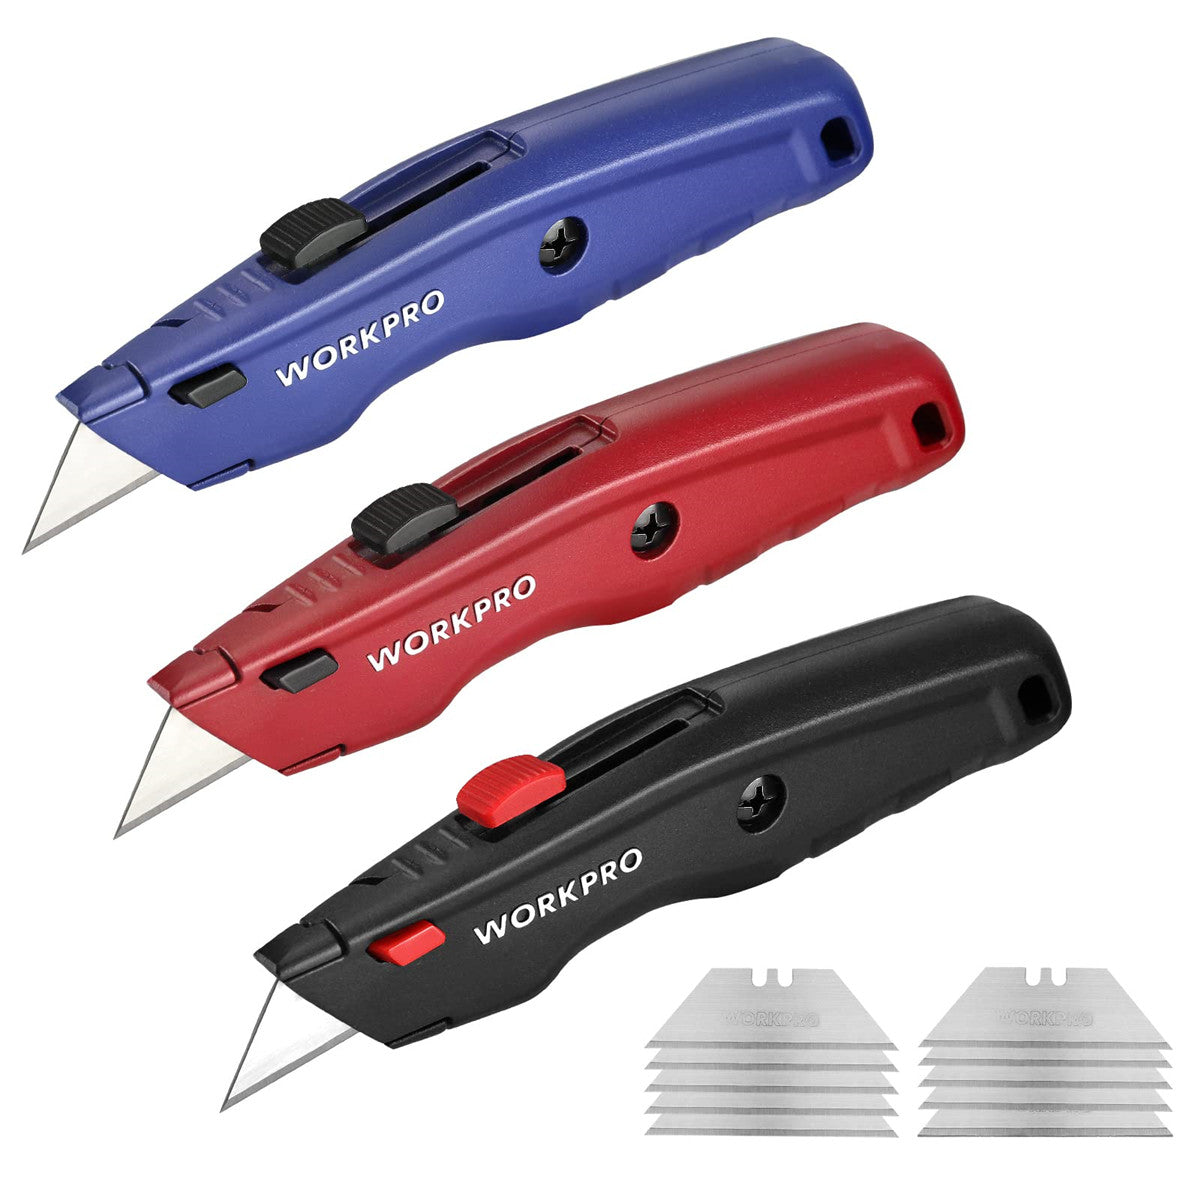 WorkPro Retractable Utility Knife and Self Retracting Safety Box Cutter 2 in 1 with 2 Extra Blades Included